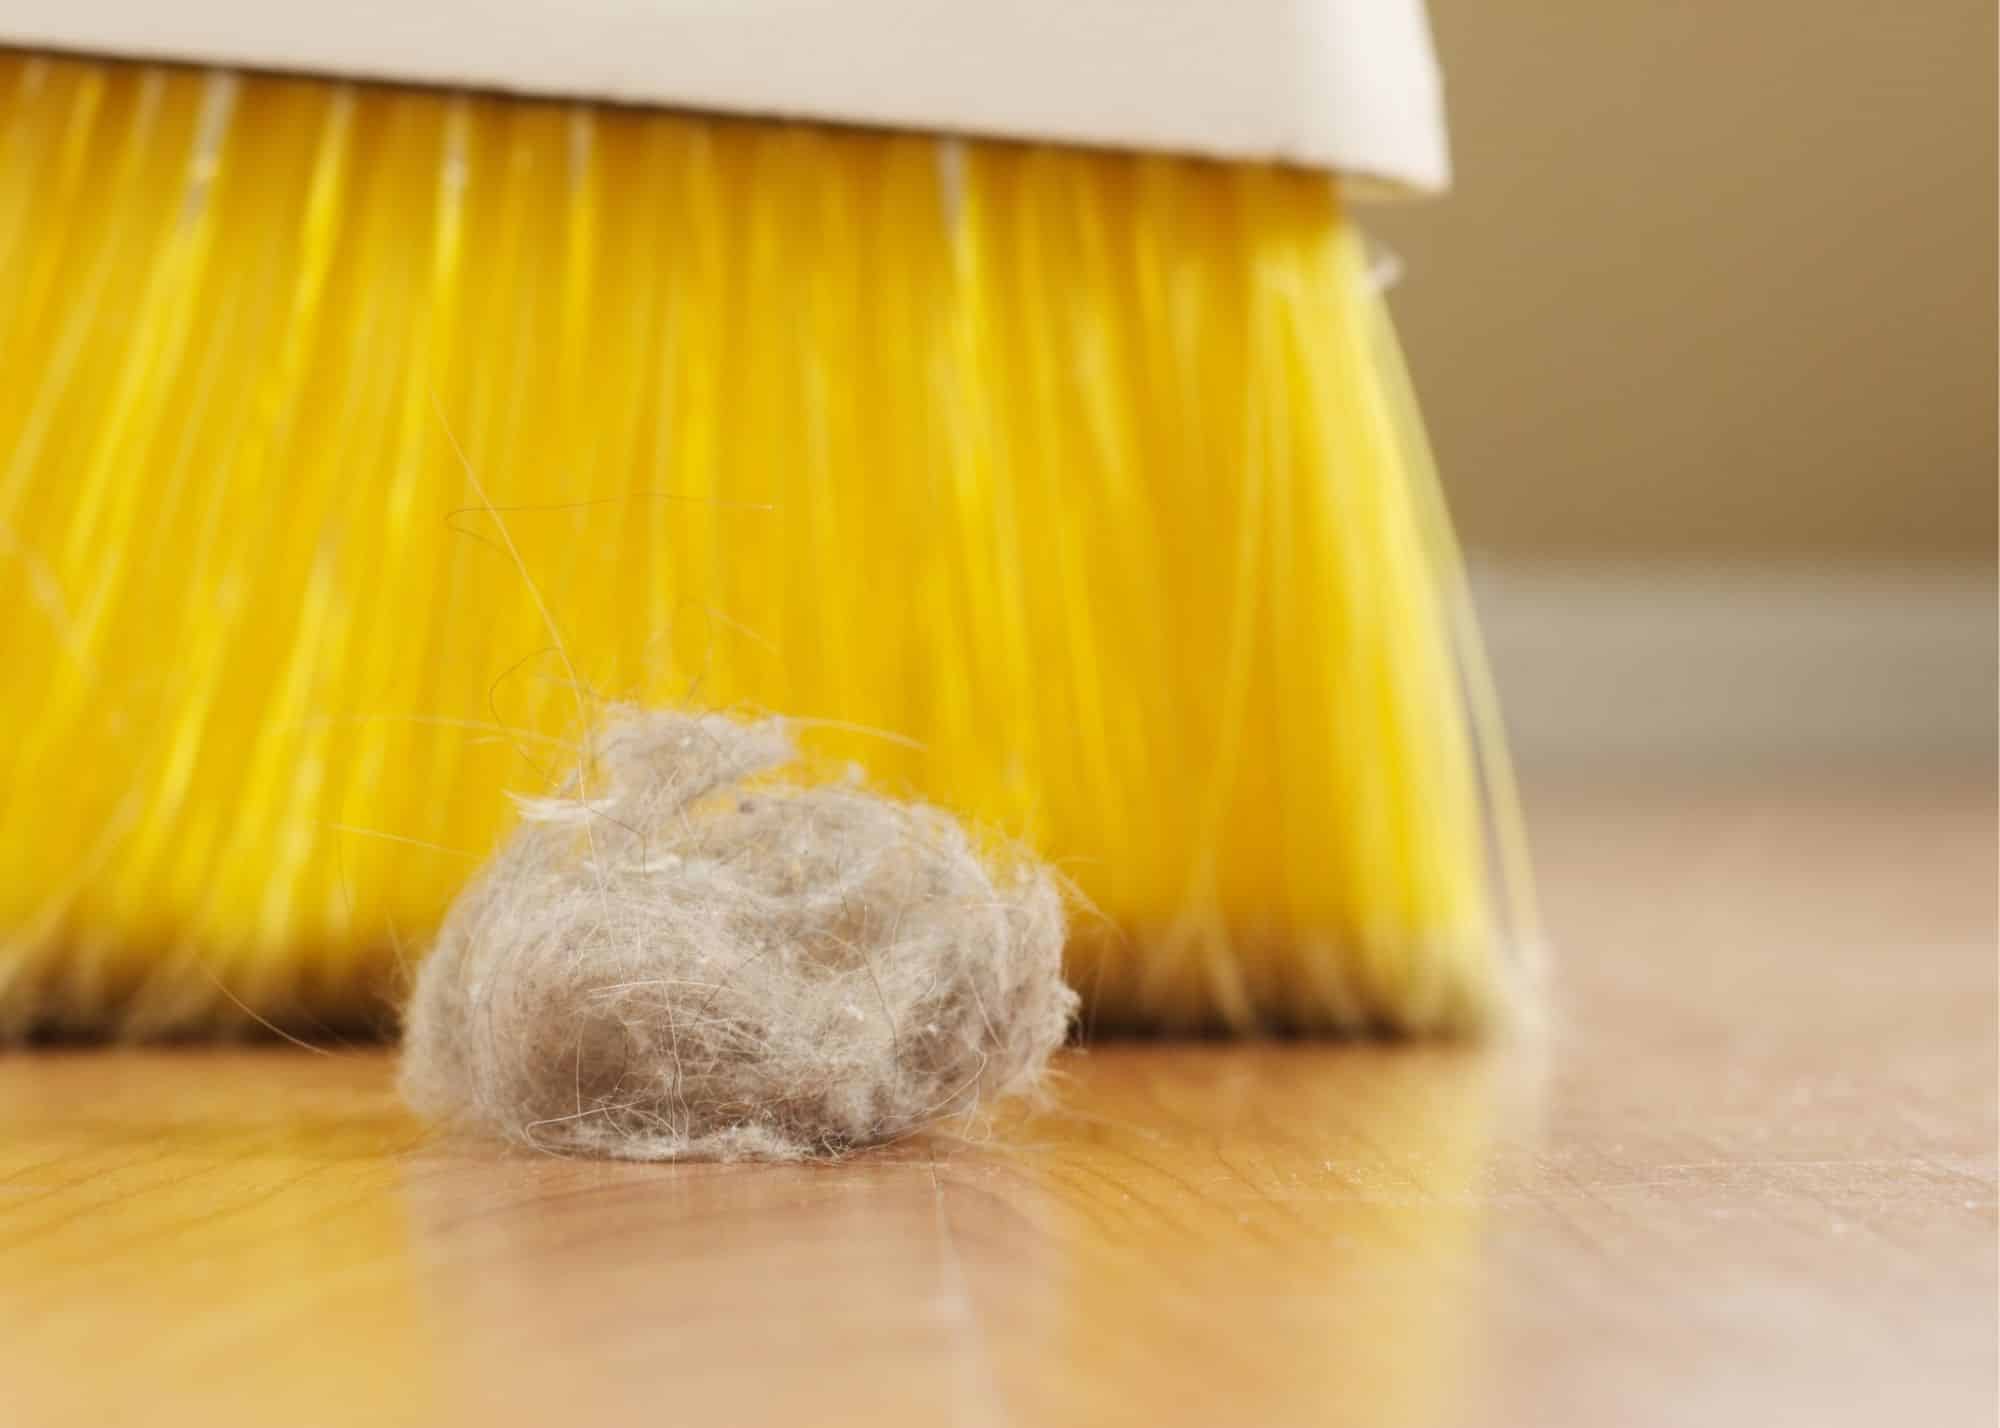 A yellow broom with a ball of wool on the floor.